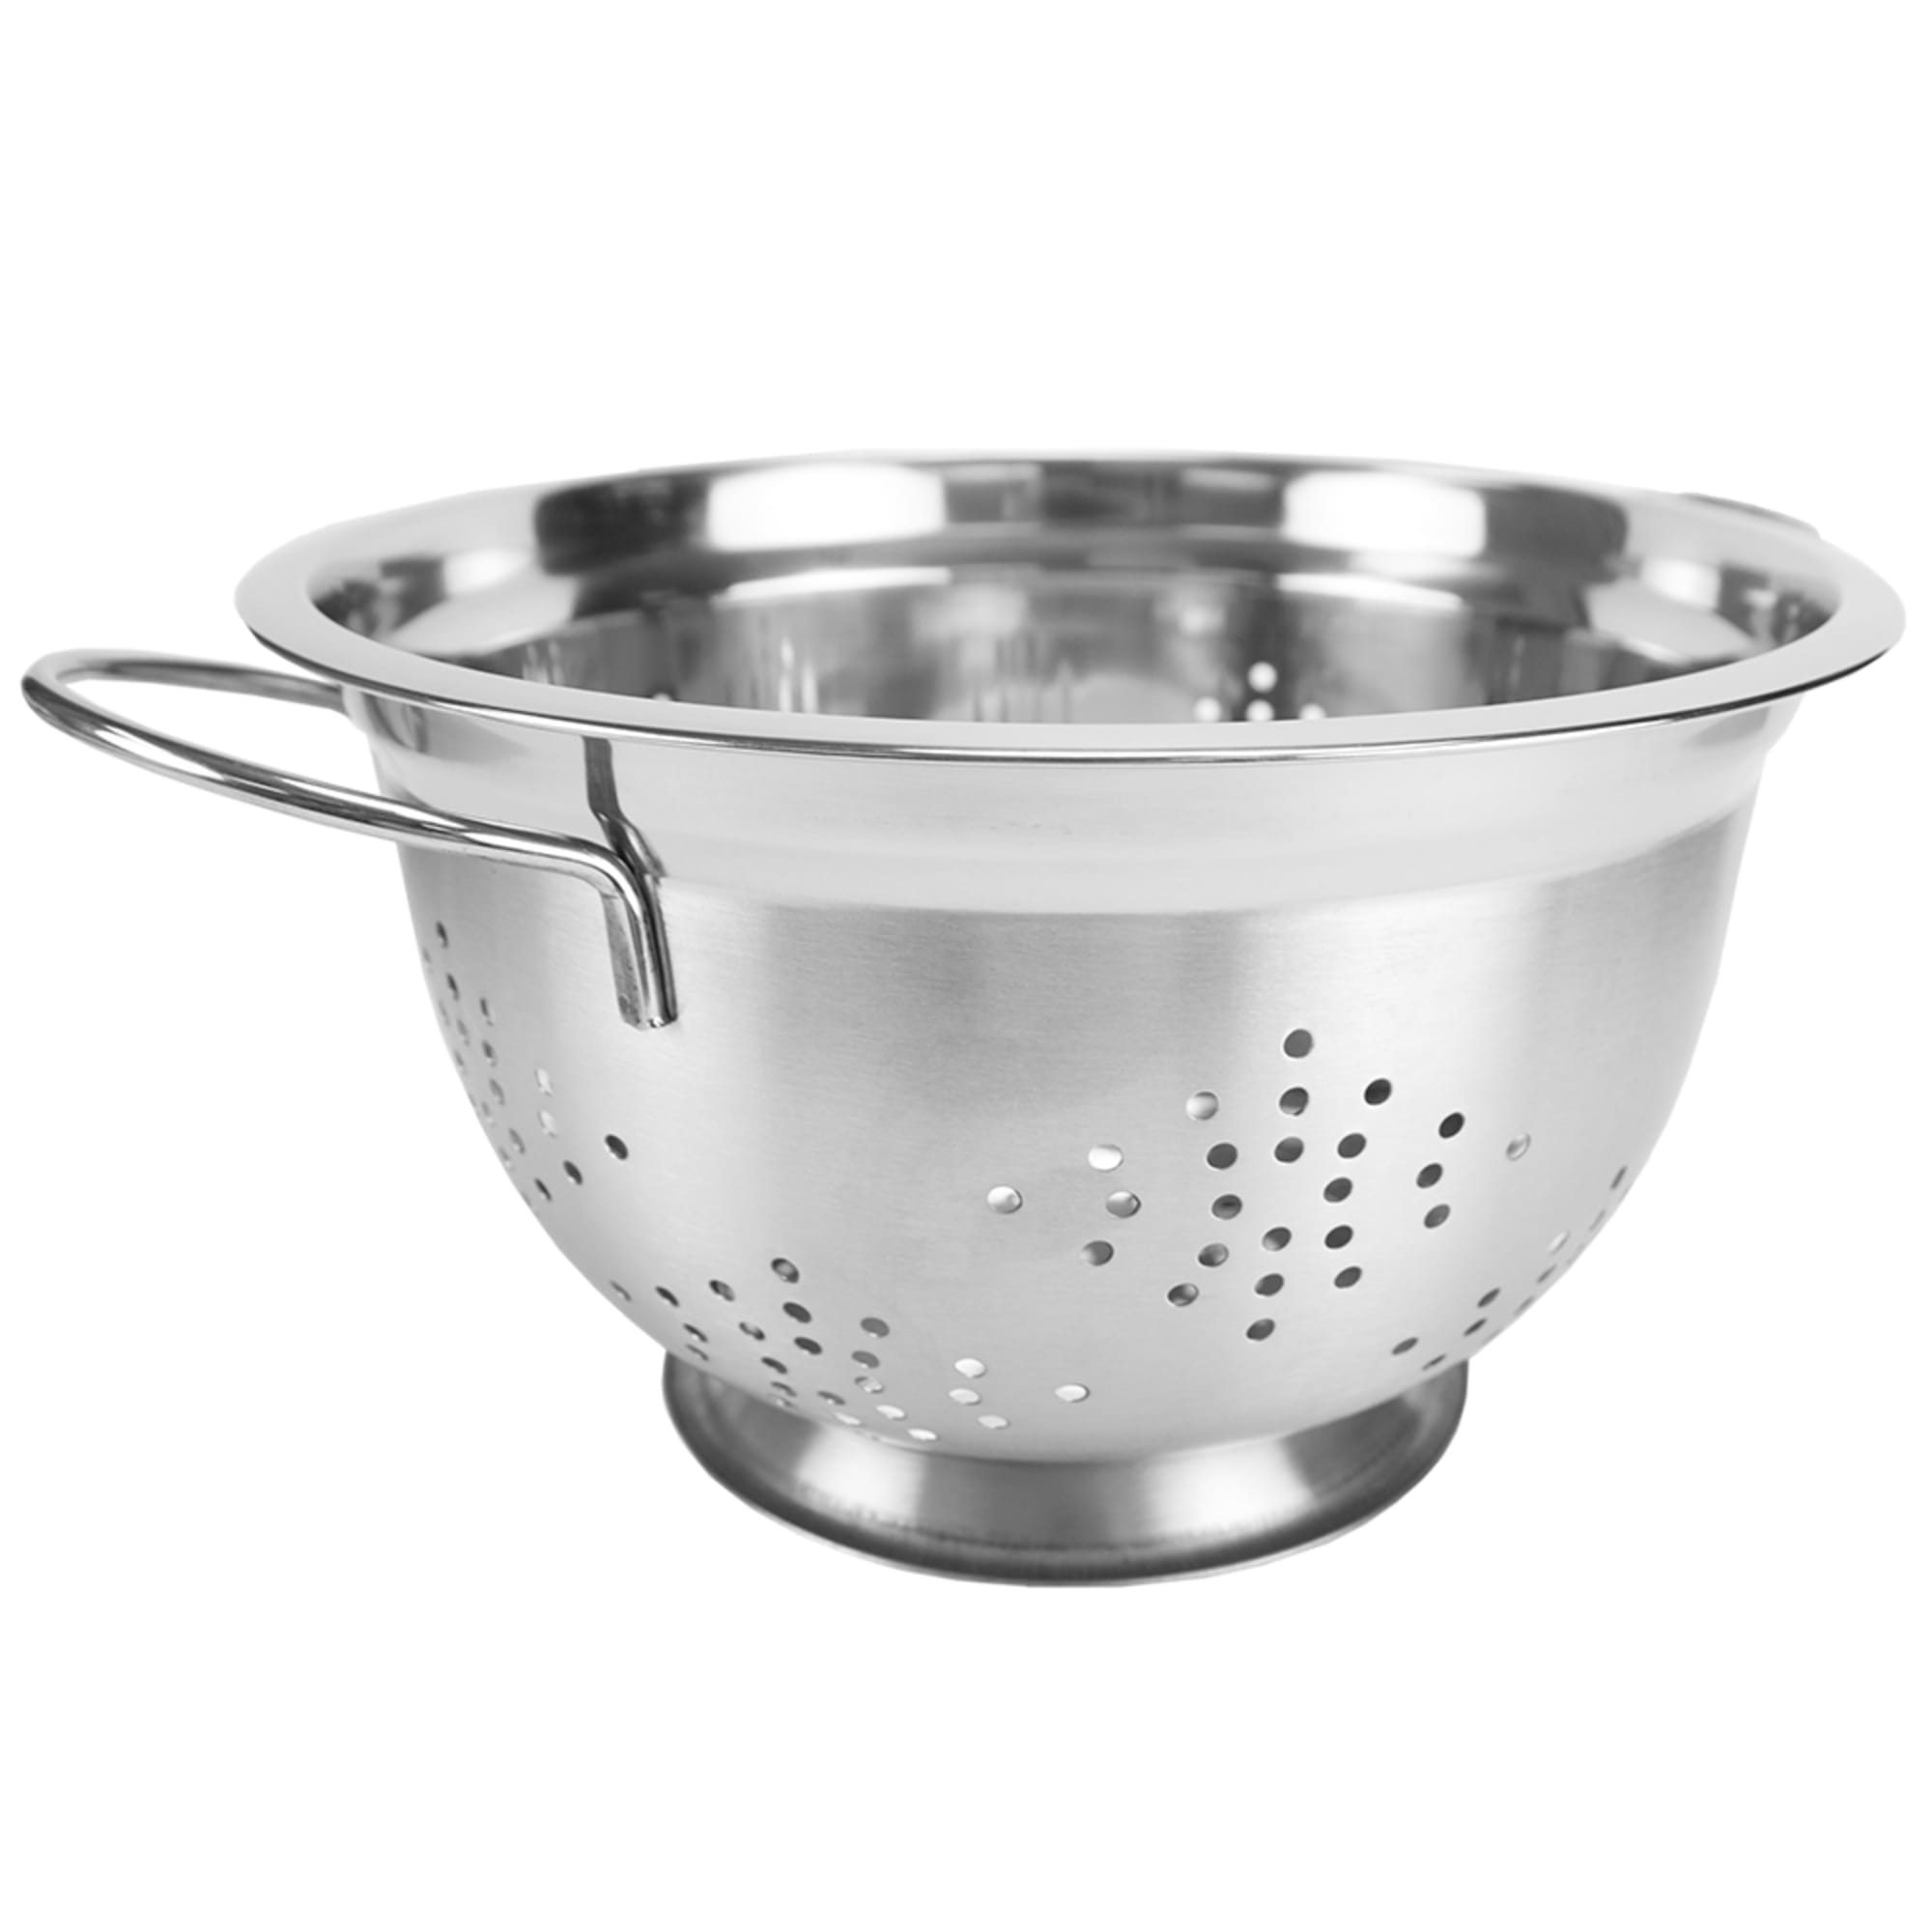 Home Basics 5 QT Deep Colander with High Stability Base and Open Handles, Silver $6.00 EACH, CASE PACK OF 12